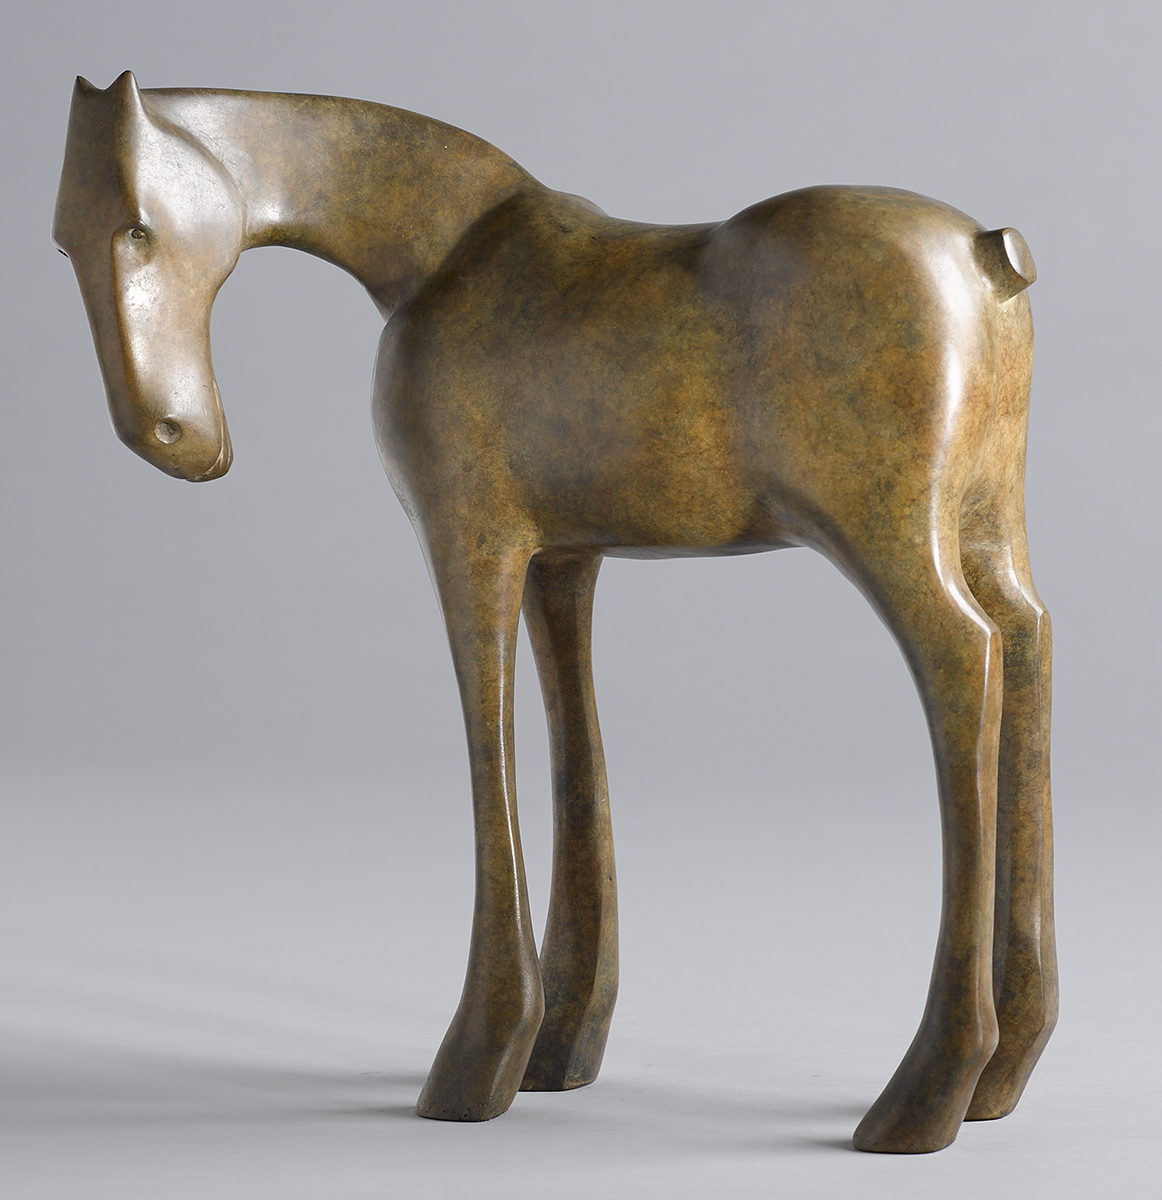 Anthony Scott (b.1968) HORSE bronze: (no. 5 from an edition of 6) signed and numbered on underside - Image 2 of 2